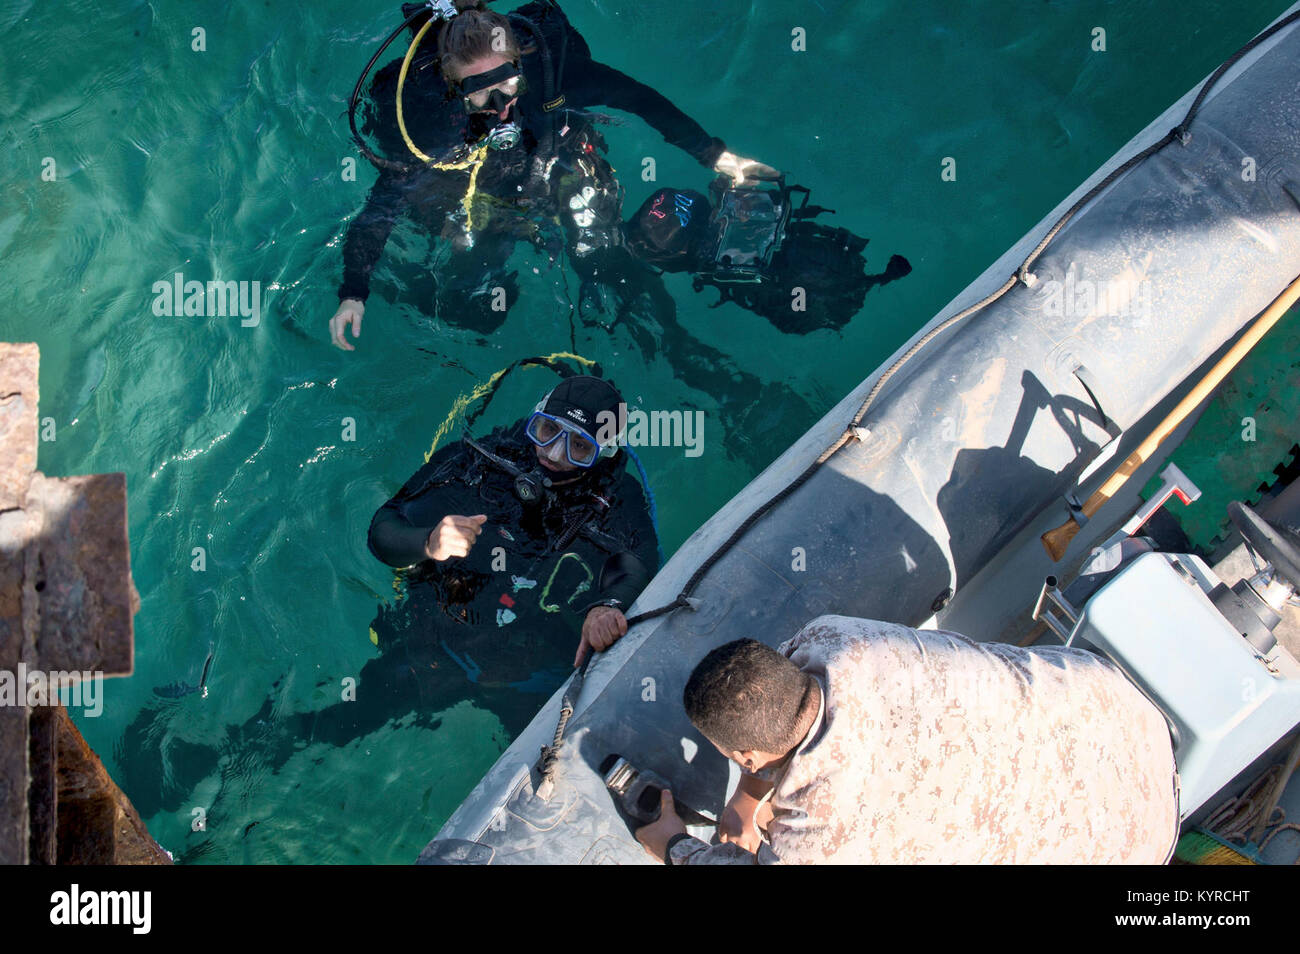 Mohammed Al-Ahmad Naval Base, KUWAIT (Jan. 8, 2018) Explosive Ordnance Disposal Technician 3rd Class Carolyn Willeford, top, assigned to Commander, Task Group 56.1, operates an underwater navigation system during a scuba dive with a Kuwait Naval Force explosive ordnance disposal technician during a training evolution as part of exercise Eager Response 18. Eager Response 18 is a bilateral explosive ordnance disposal military exercise between the State of Kuwait and the United States. The exercise fortifies military-to-military relationships between the Kuwait Naval Force and U.S. Navy, advances Stock Photo